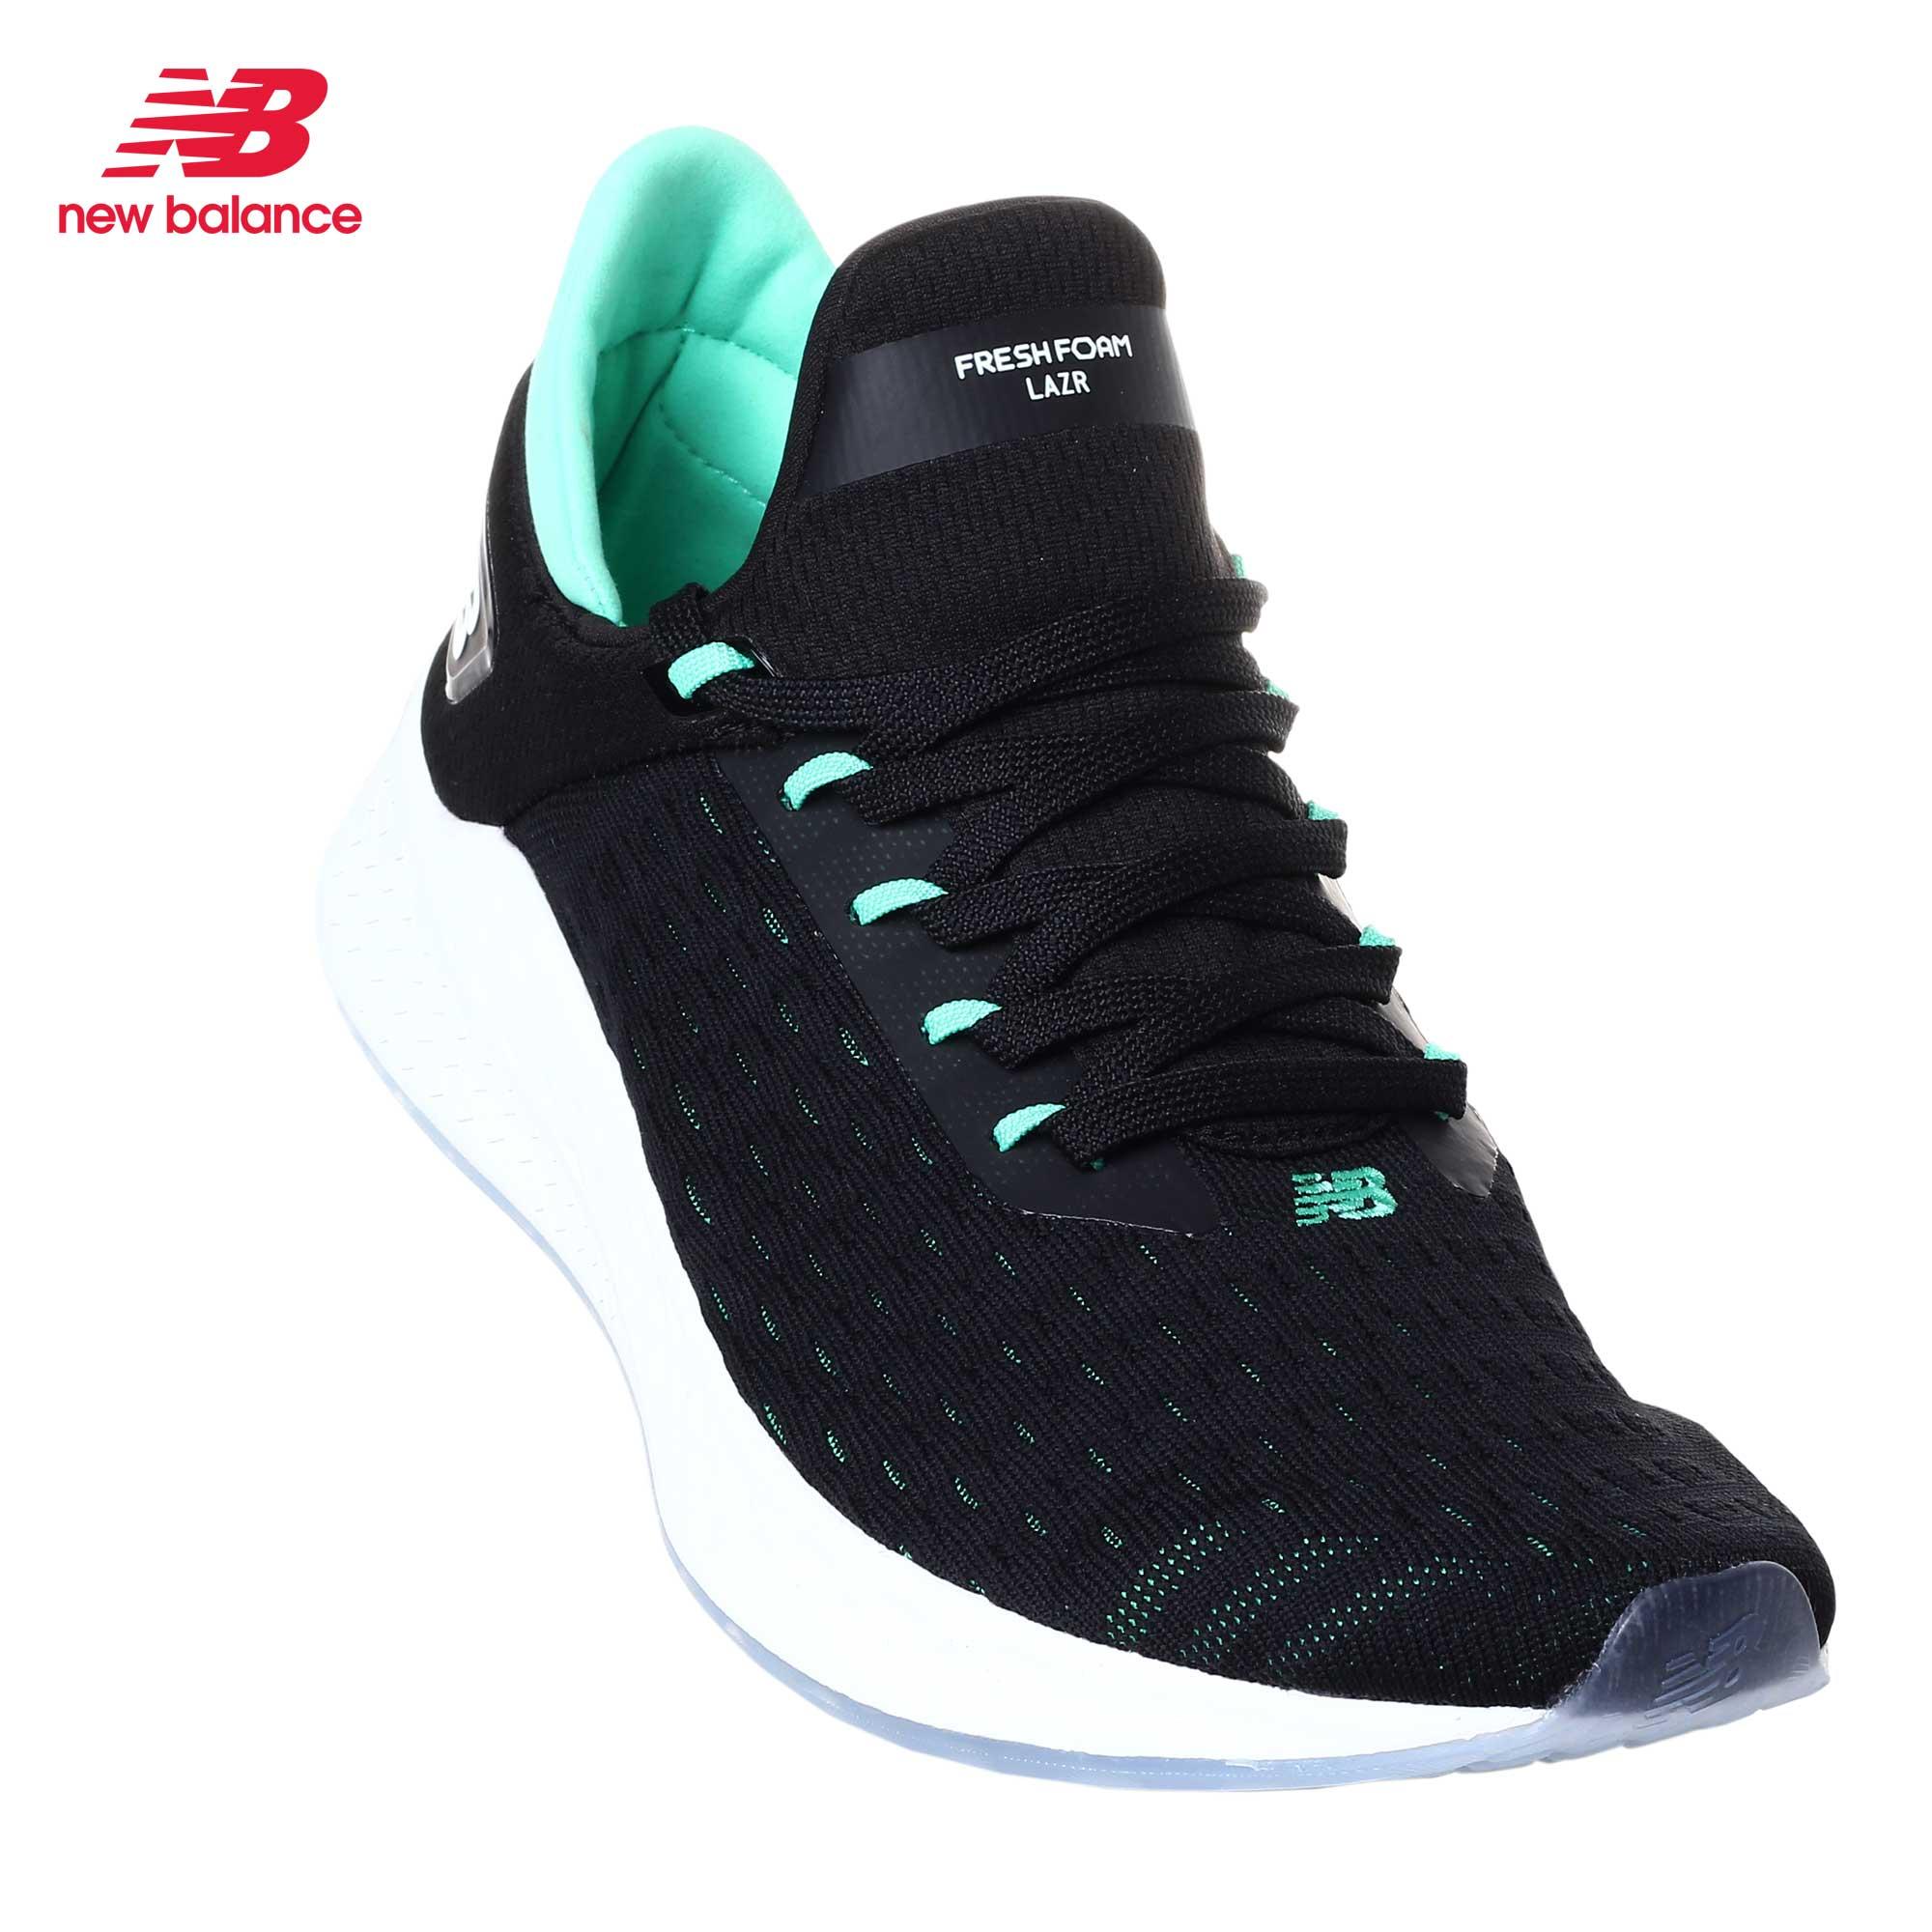 new balance running shoes in ph - 55 